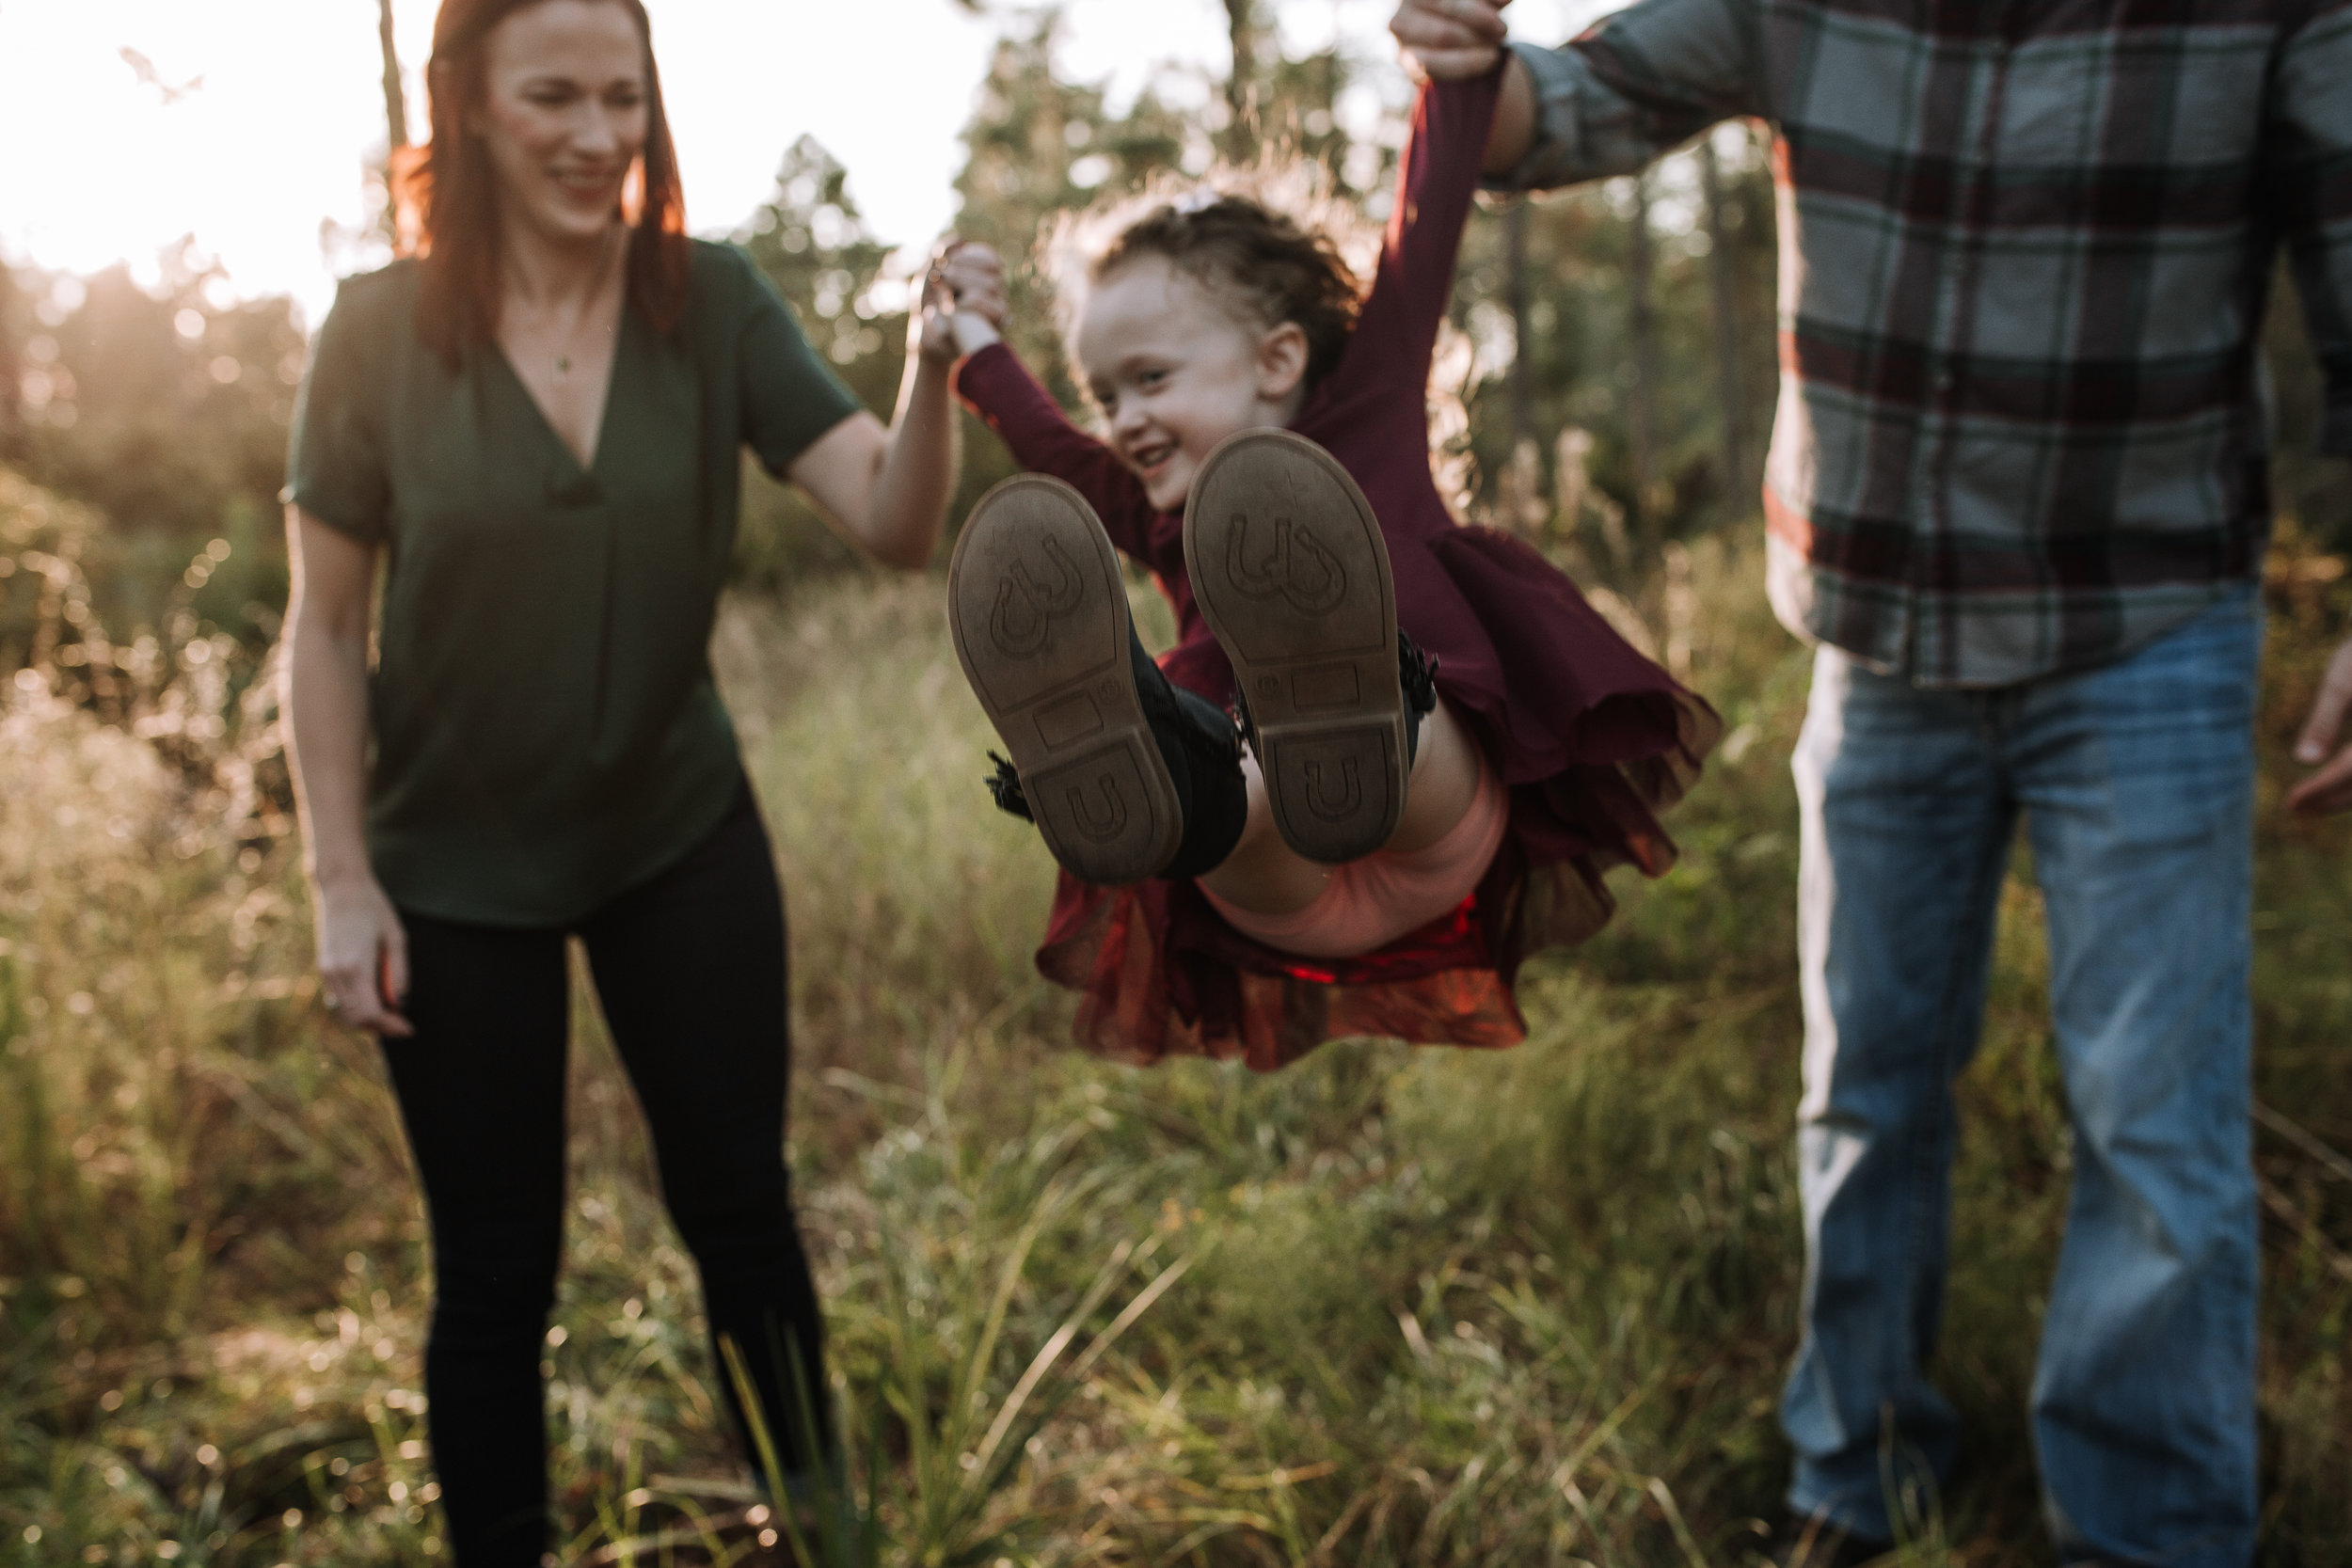 Orlando family photographer and what to wear from family pictures